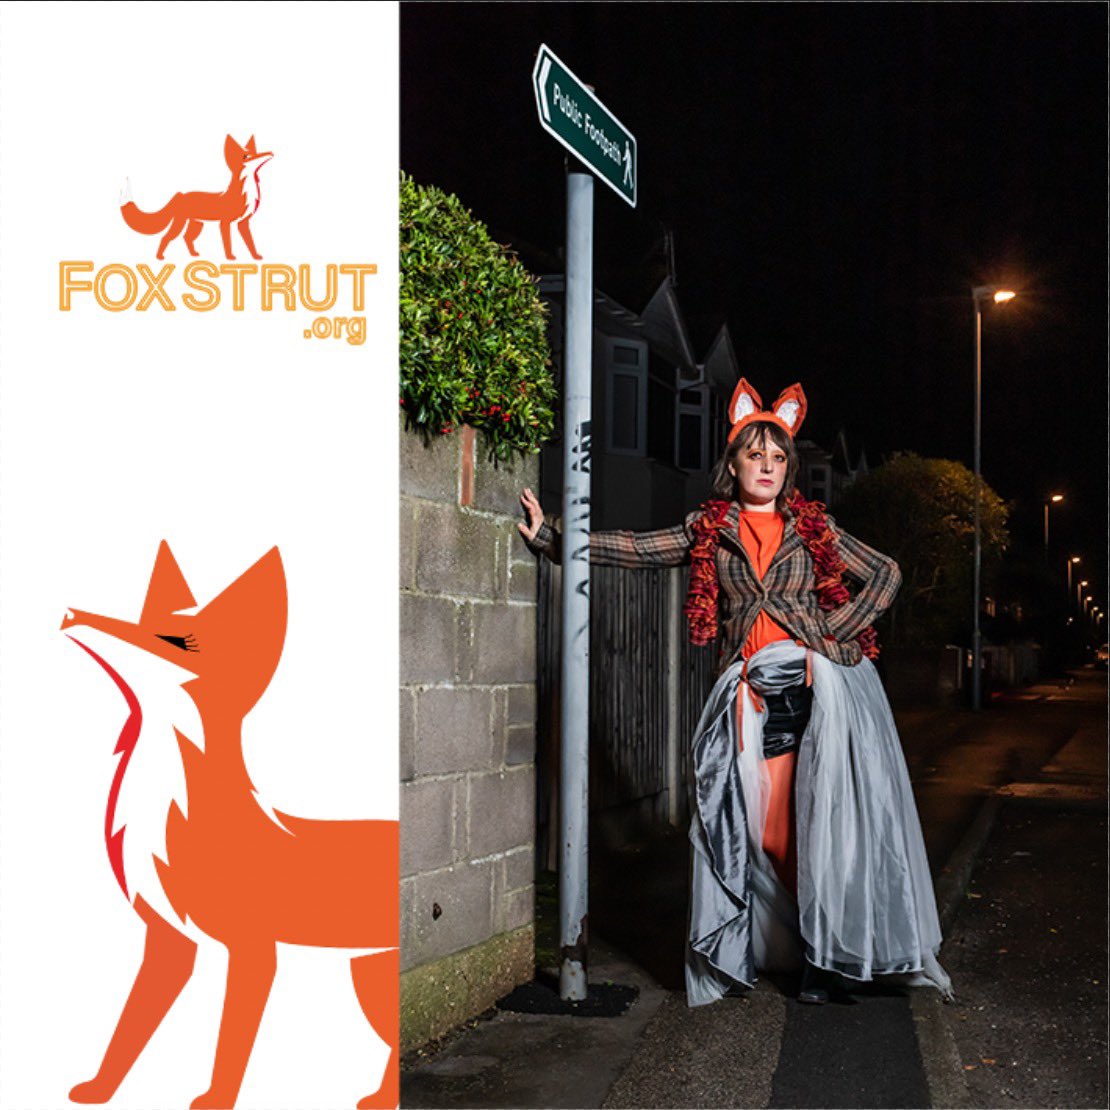 Announcing Foxstrut! Bournemouth - 8th December. Women & LGBTQ+ community, urban fox themed procession. Being seen. Occupying space on our streets after dark. Foxstrut.org for info @thegobbledegook @WinchesterRASAC